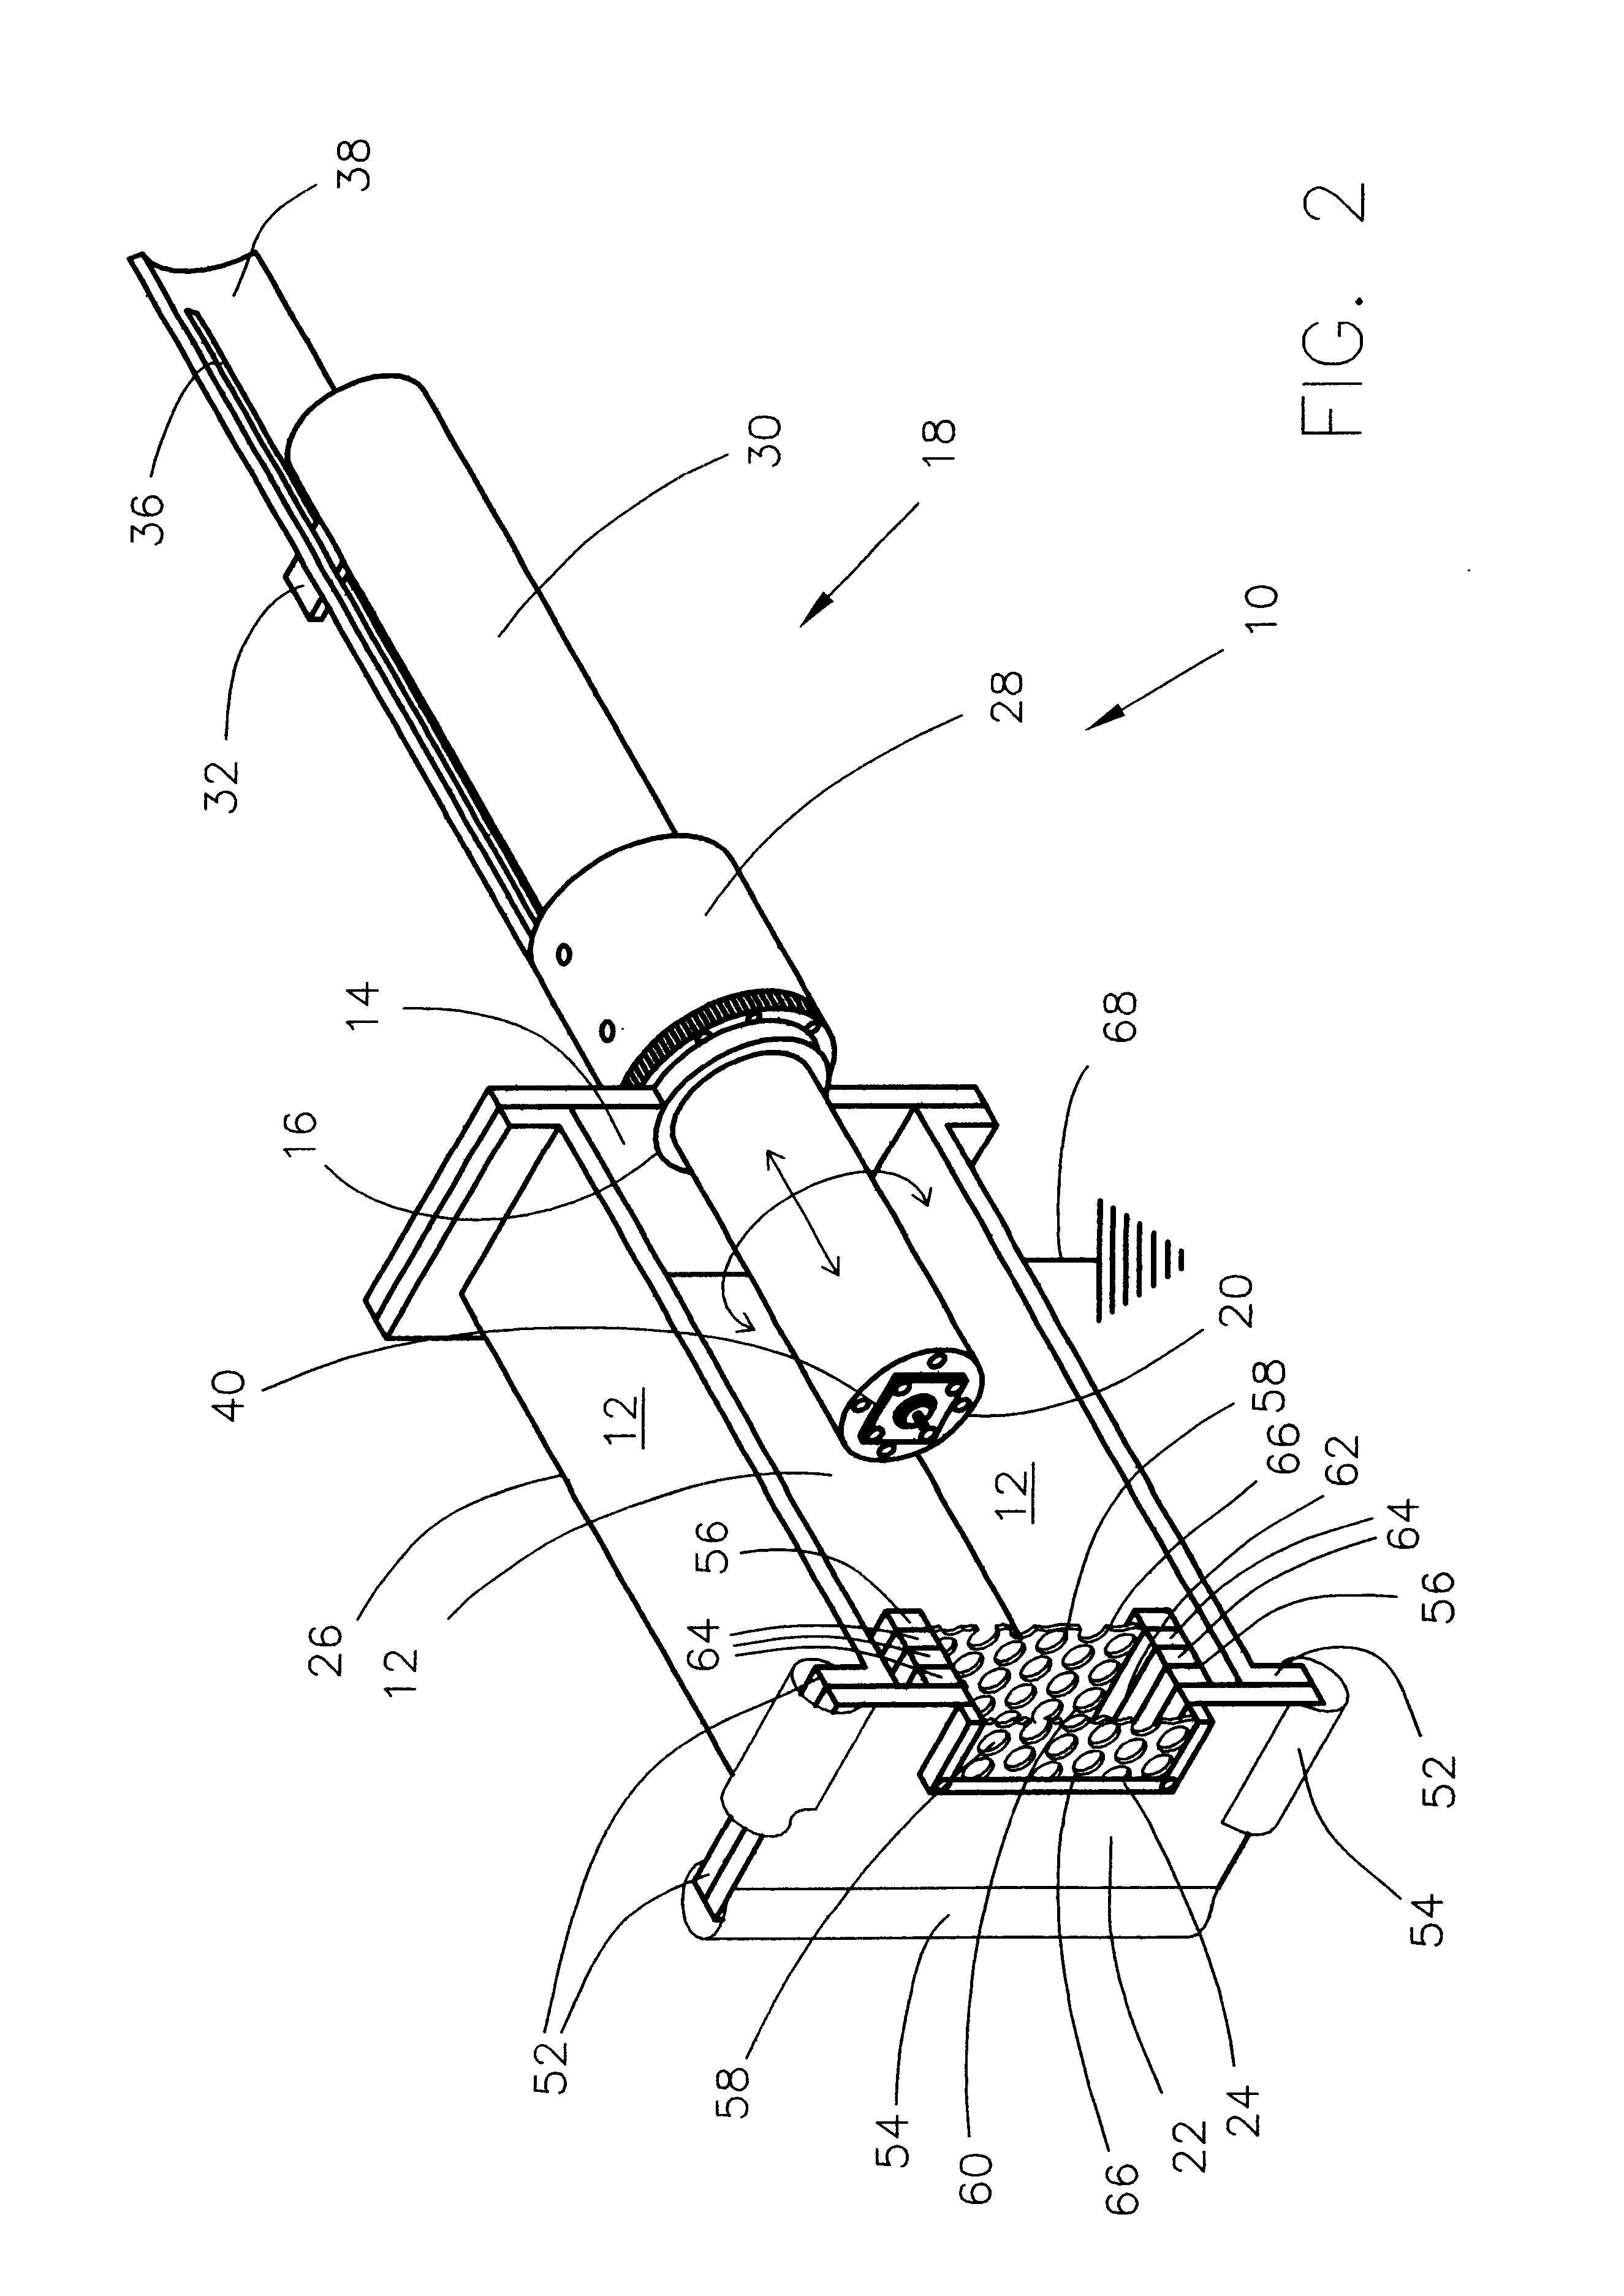 Apparatus for testing various structural parameters of an electro-magnetic radiation barrier